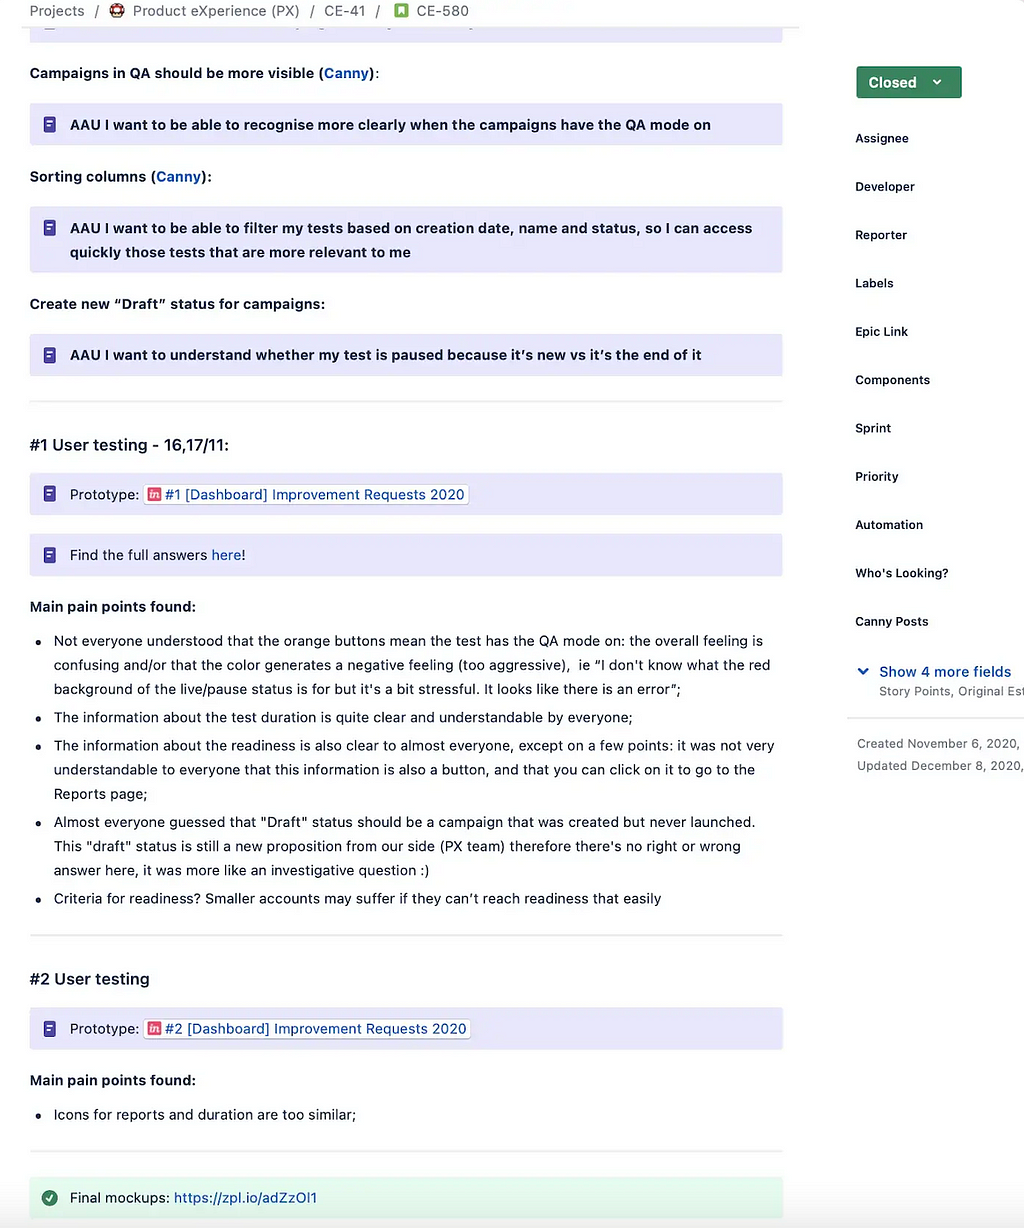 A screenshot of a ticket description I did inside Jira software, containing user stories, pain points description, links to user research prototypes and takeaways and a link to the final prototype